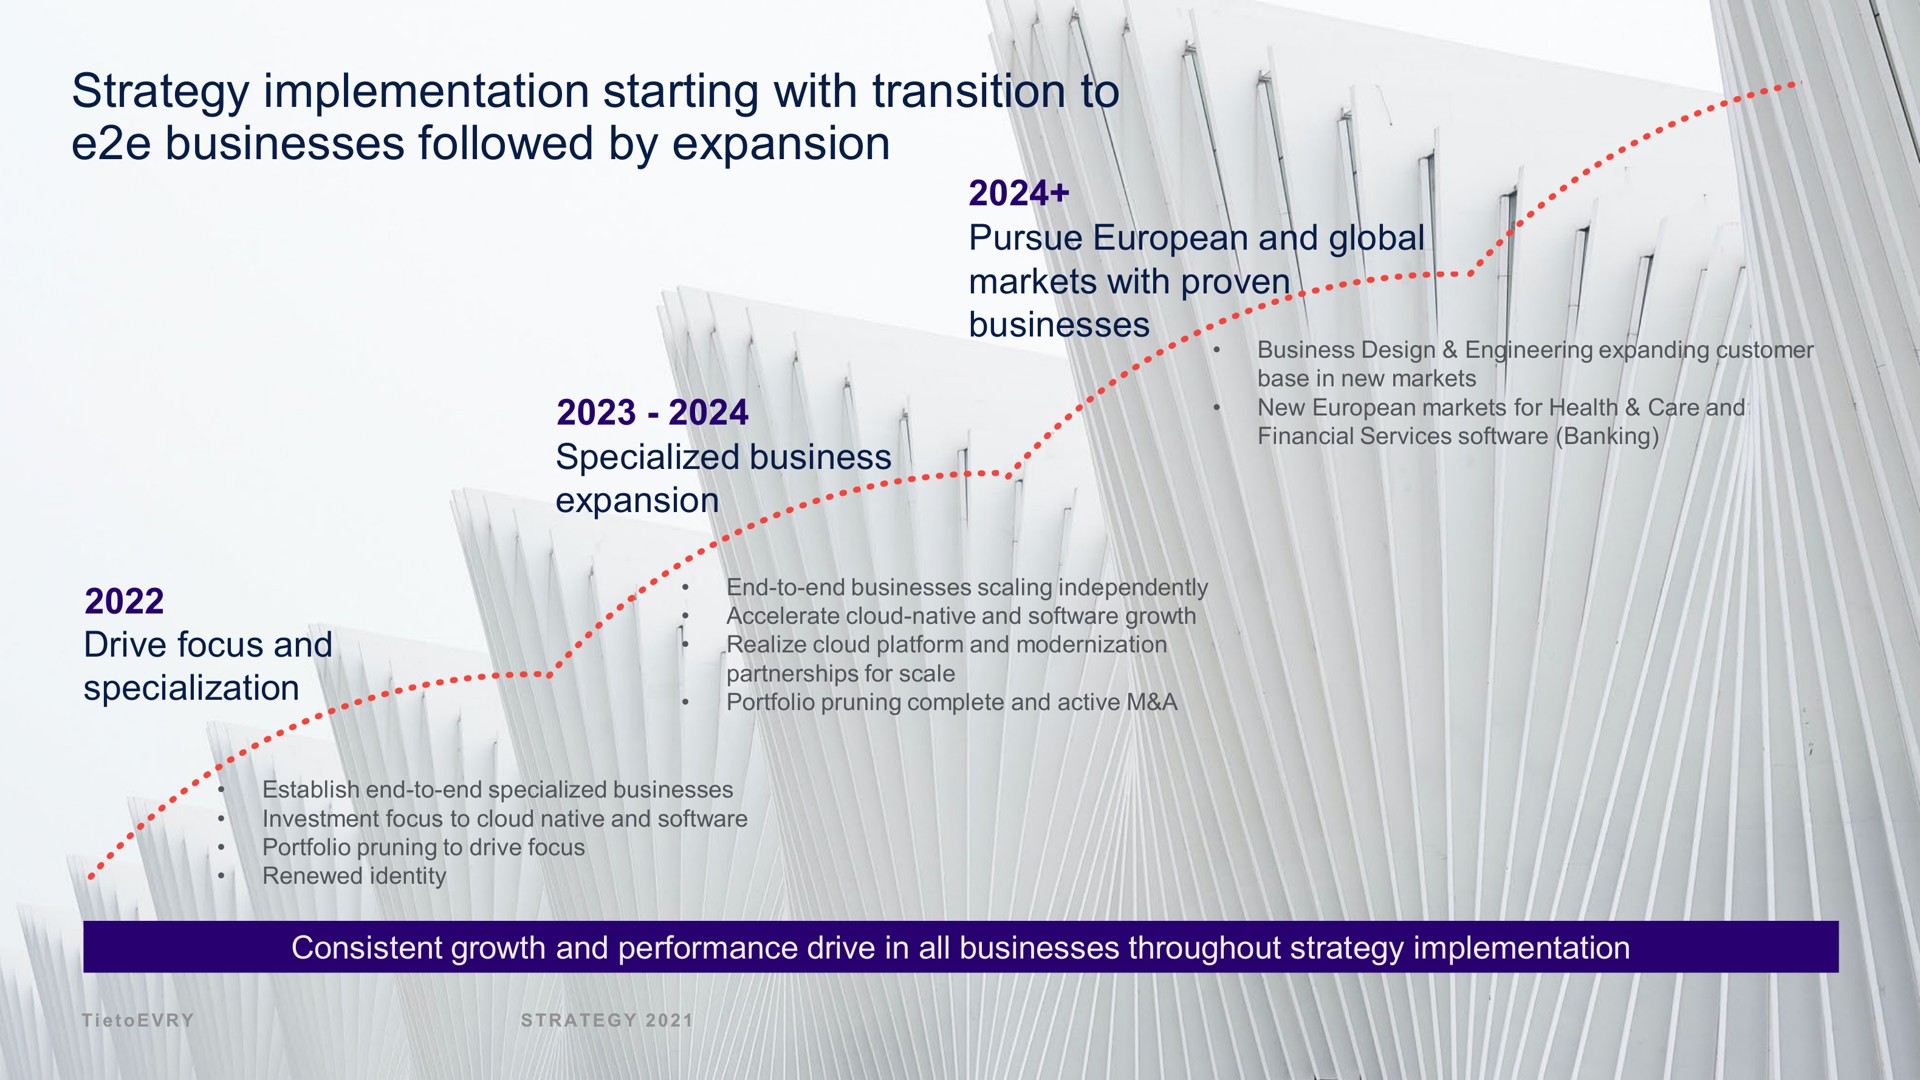 strategy implementation starting with transition to businesses followed by expansion | Tietoevry